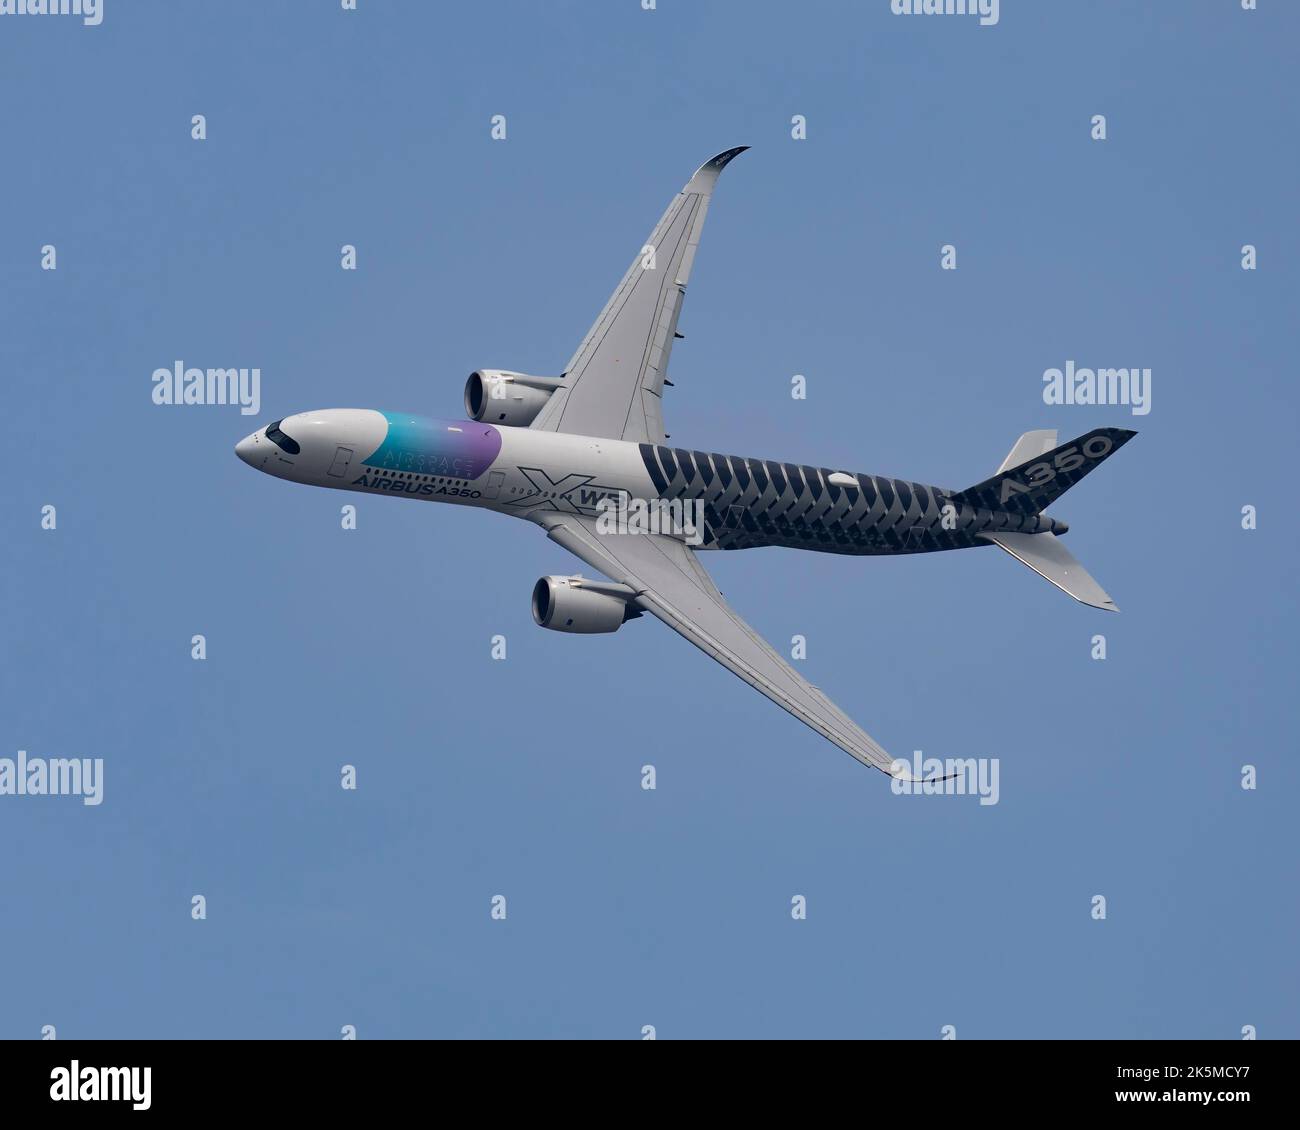 The Airbus A350 commercial airliner flying at the 2022 Farnborough International Air Show Stock Photo